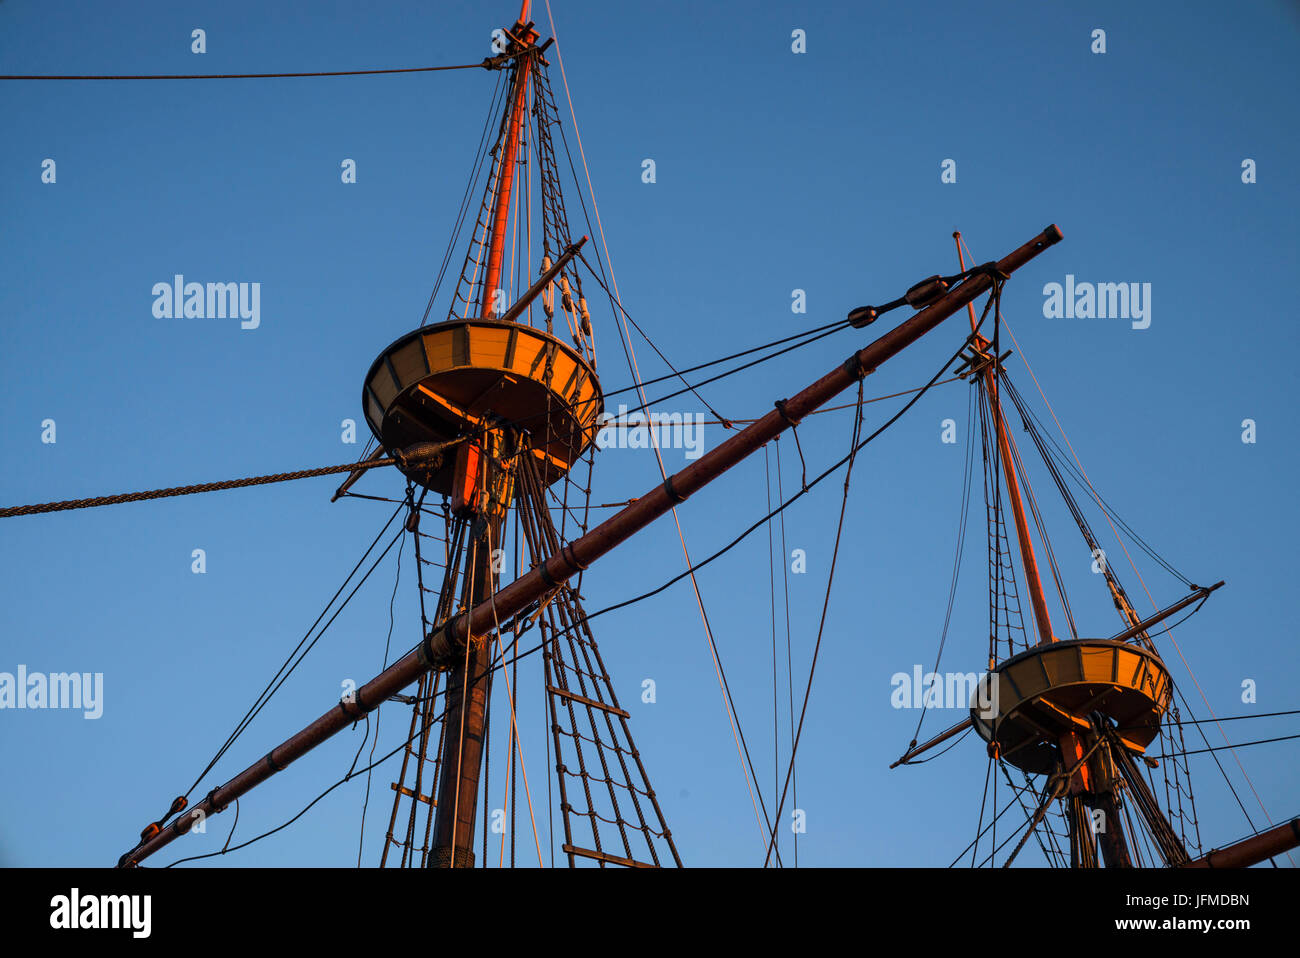 USA, Massachusetts, Plymouth, replica of the Mayflower, ship that brought first European settlers from England to Massachusetts in 1620 Stock Photo